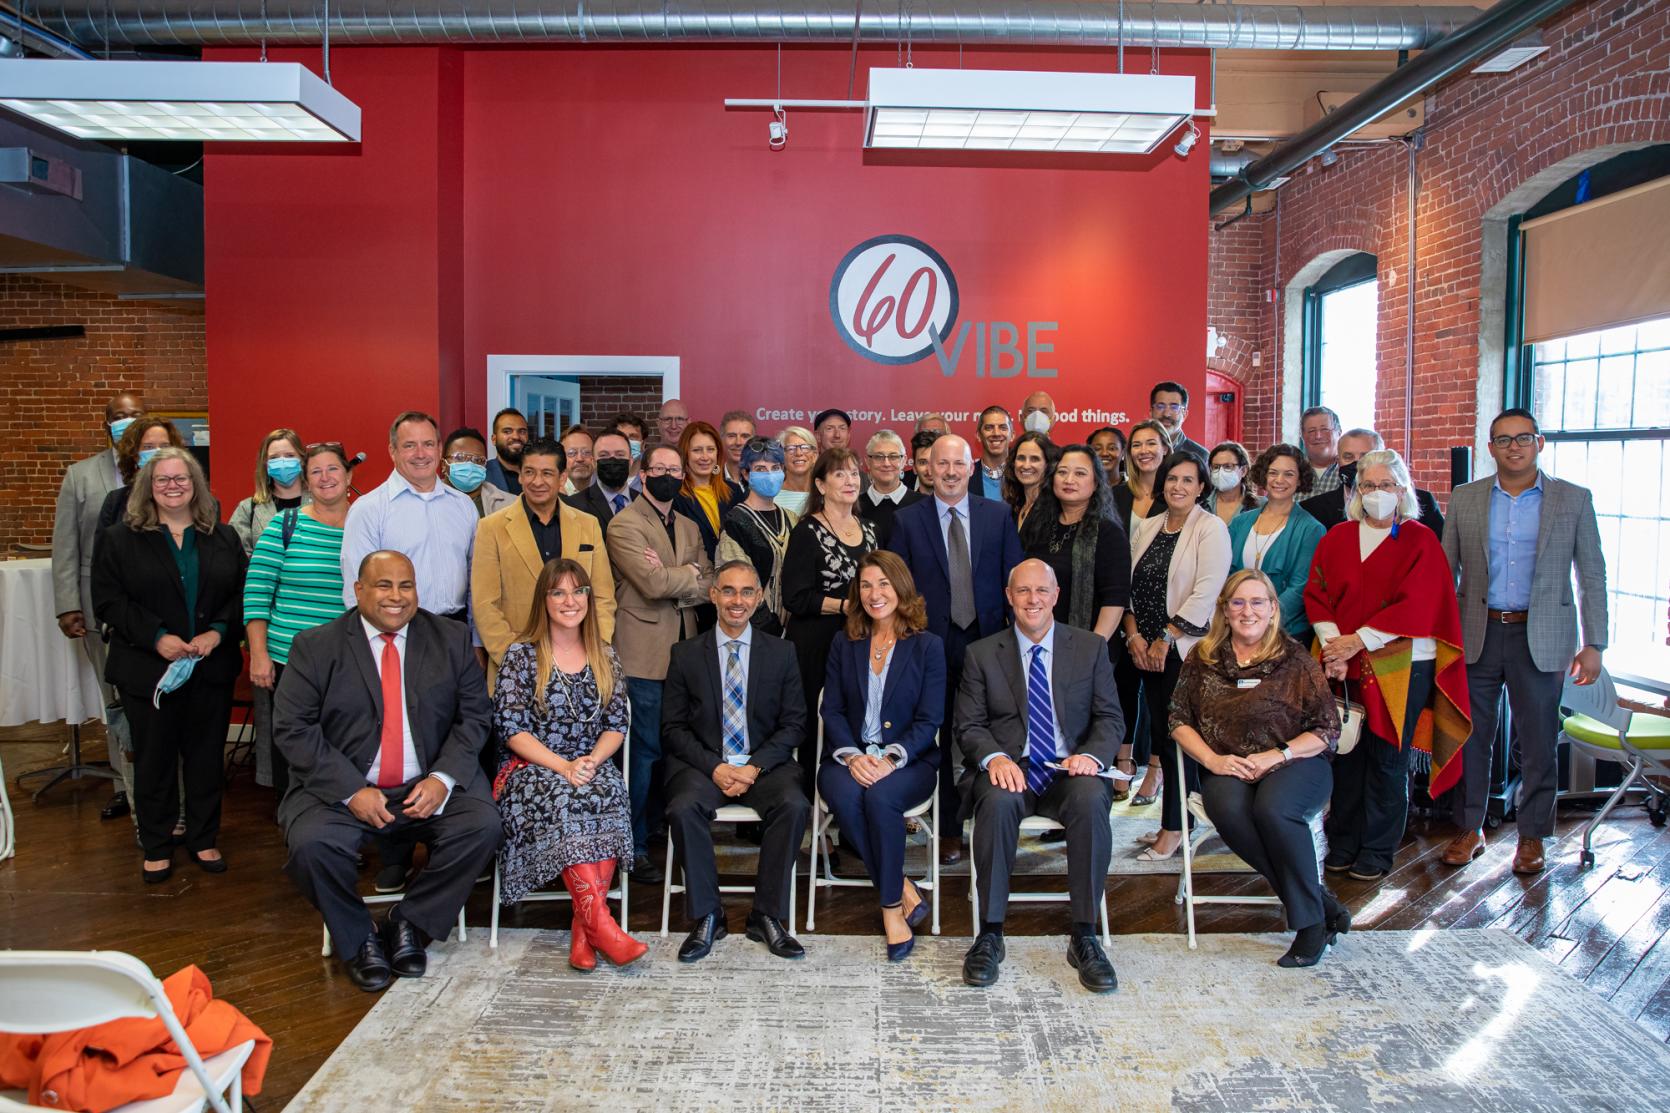 Lt. Governor Polito and Secretary Kennealy with Collaborative Workspace Program grantees. 